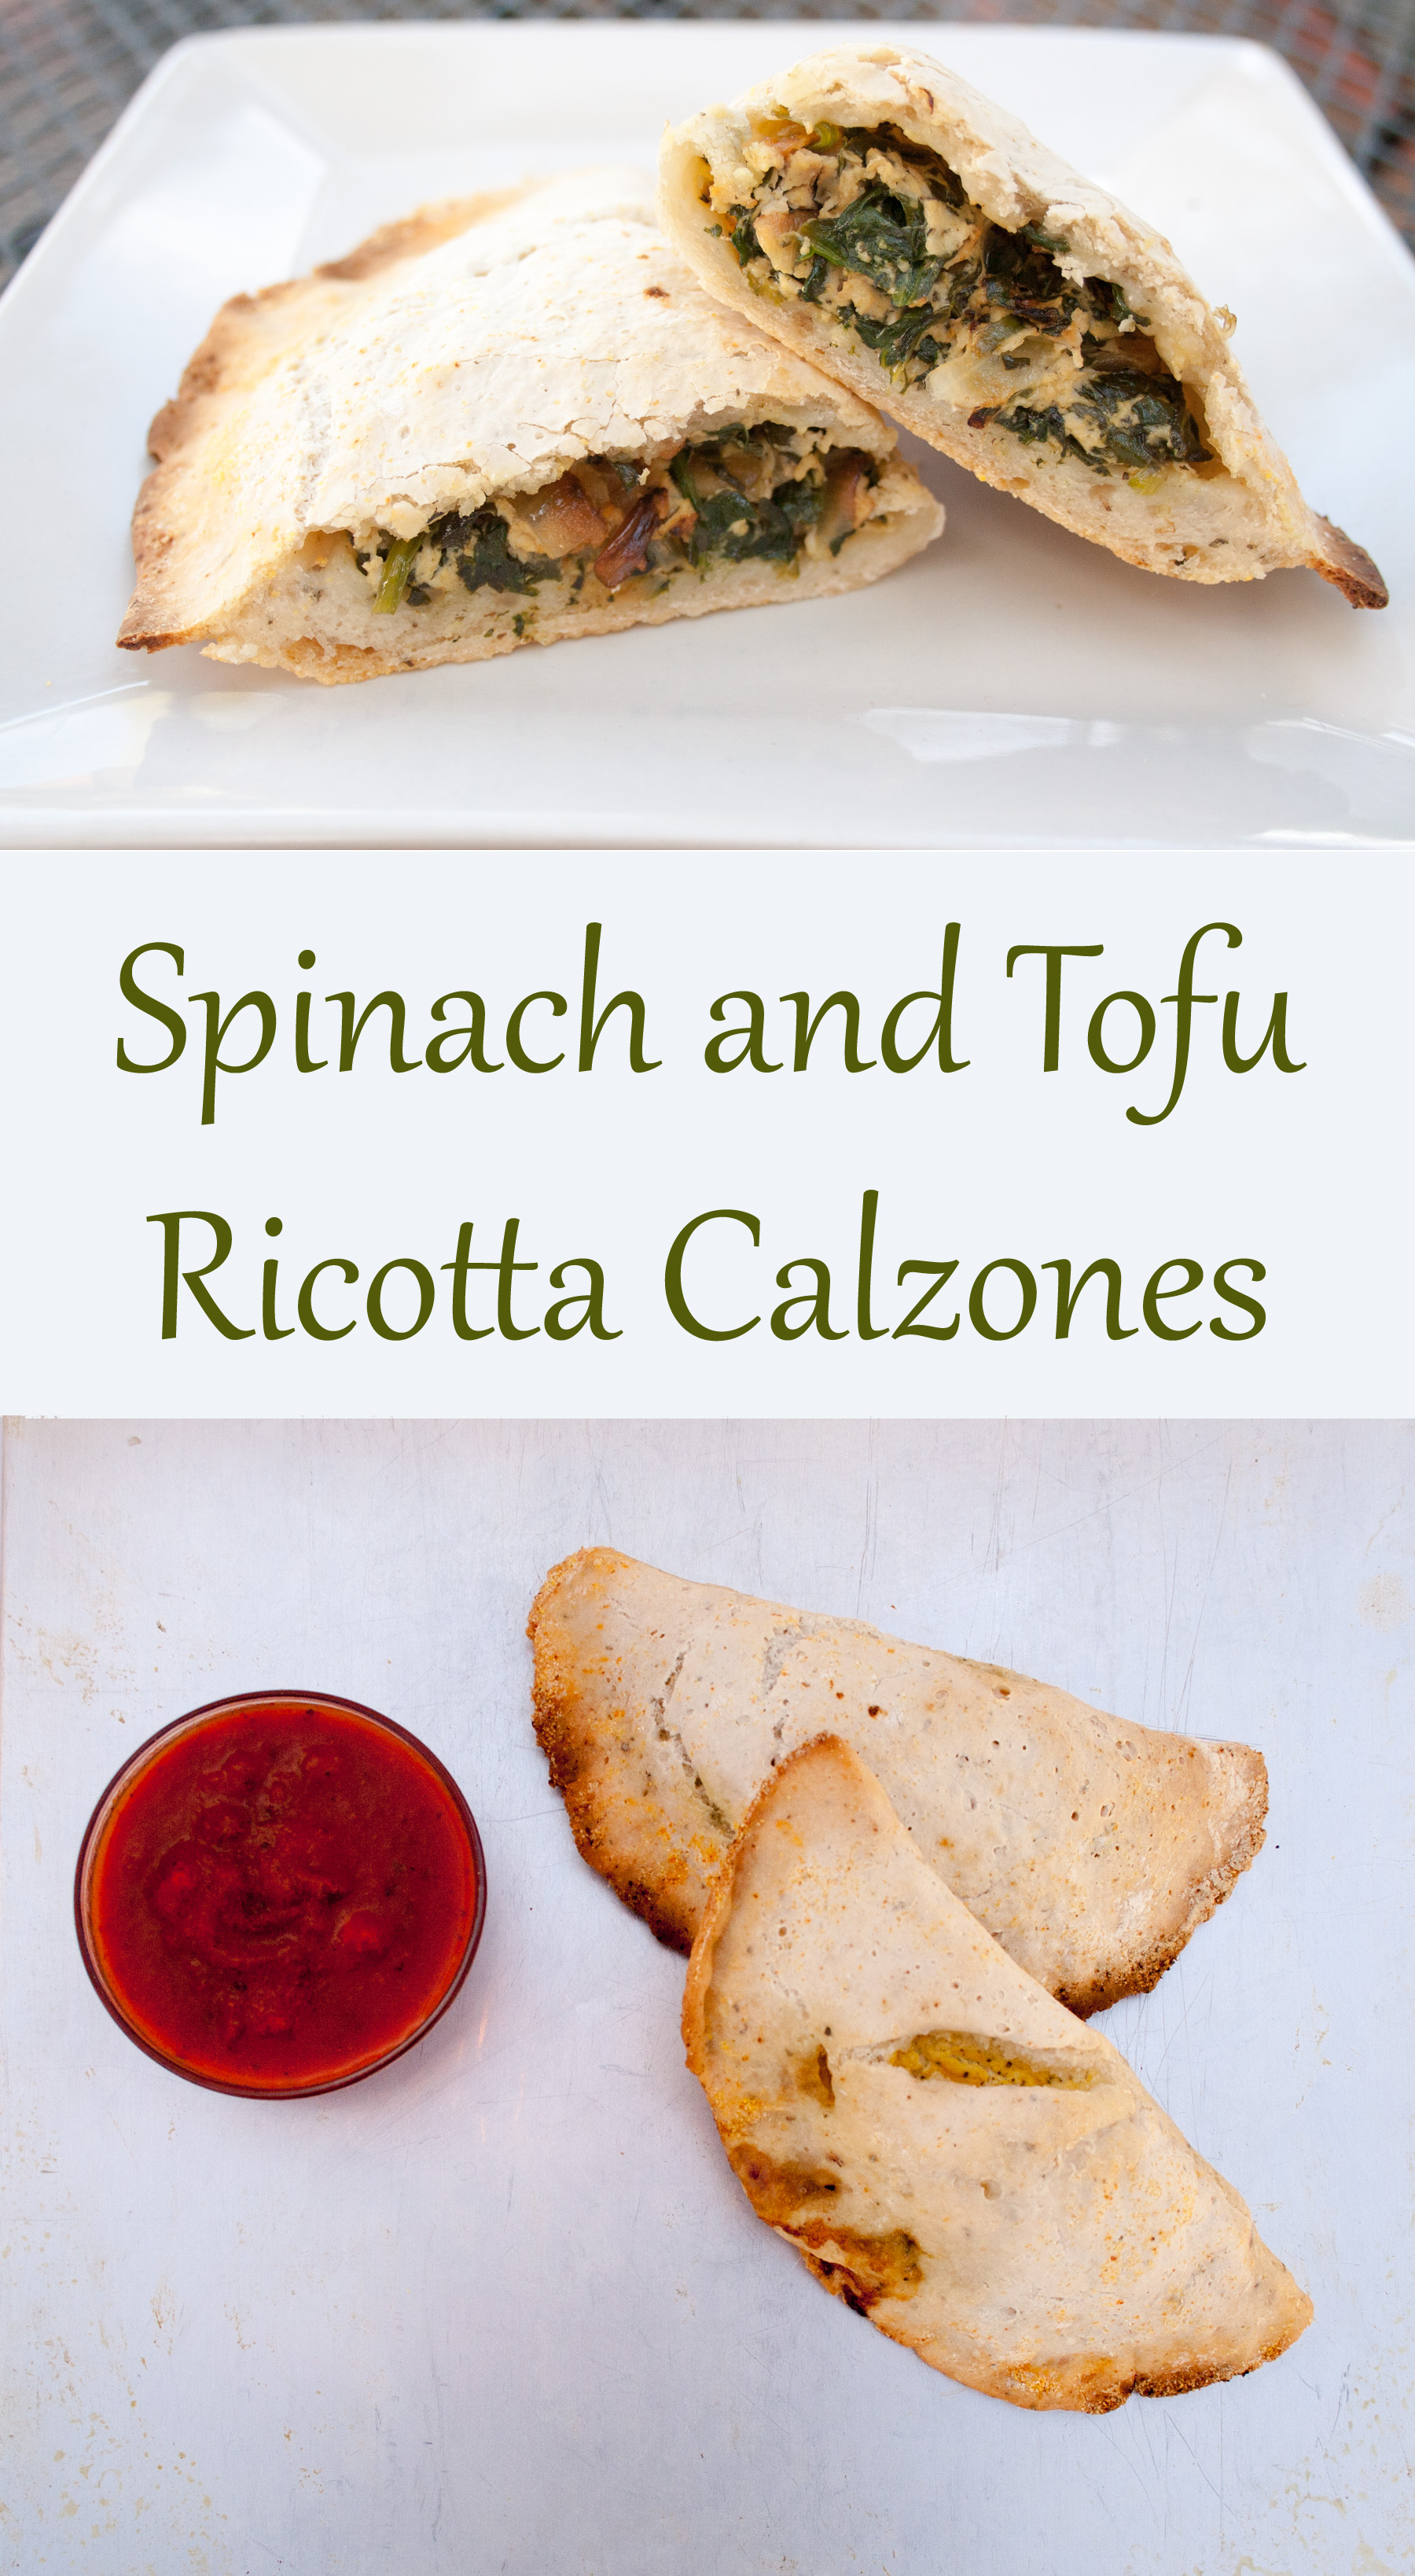 Spinach and Tofu Ricotta Calzones collage photo with two photos and text in between.